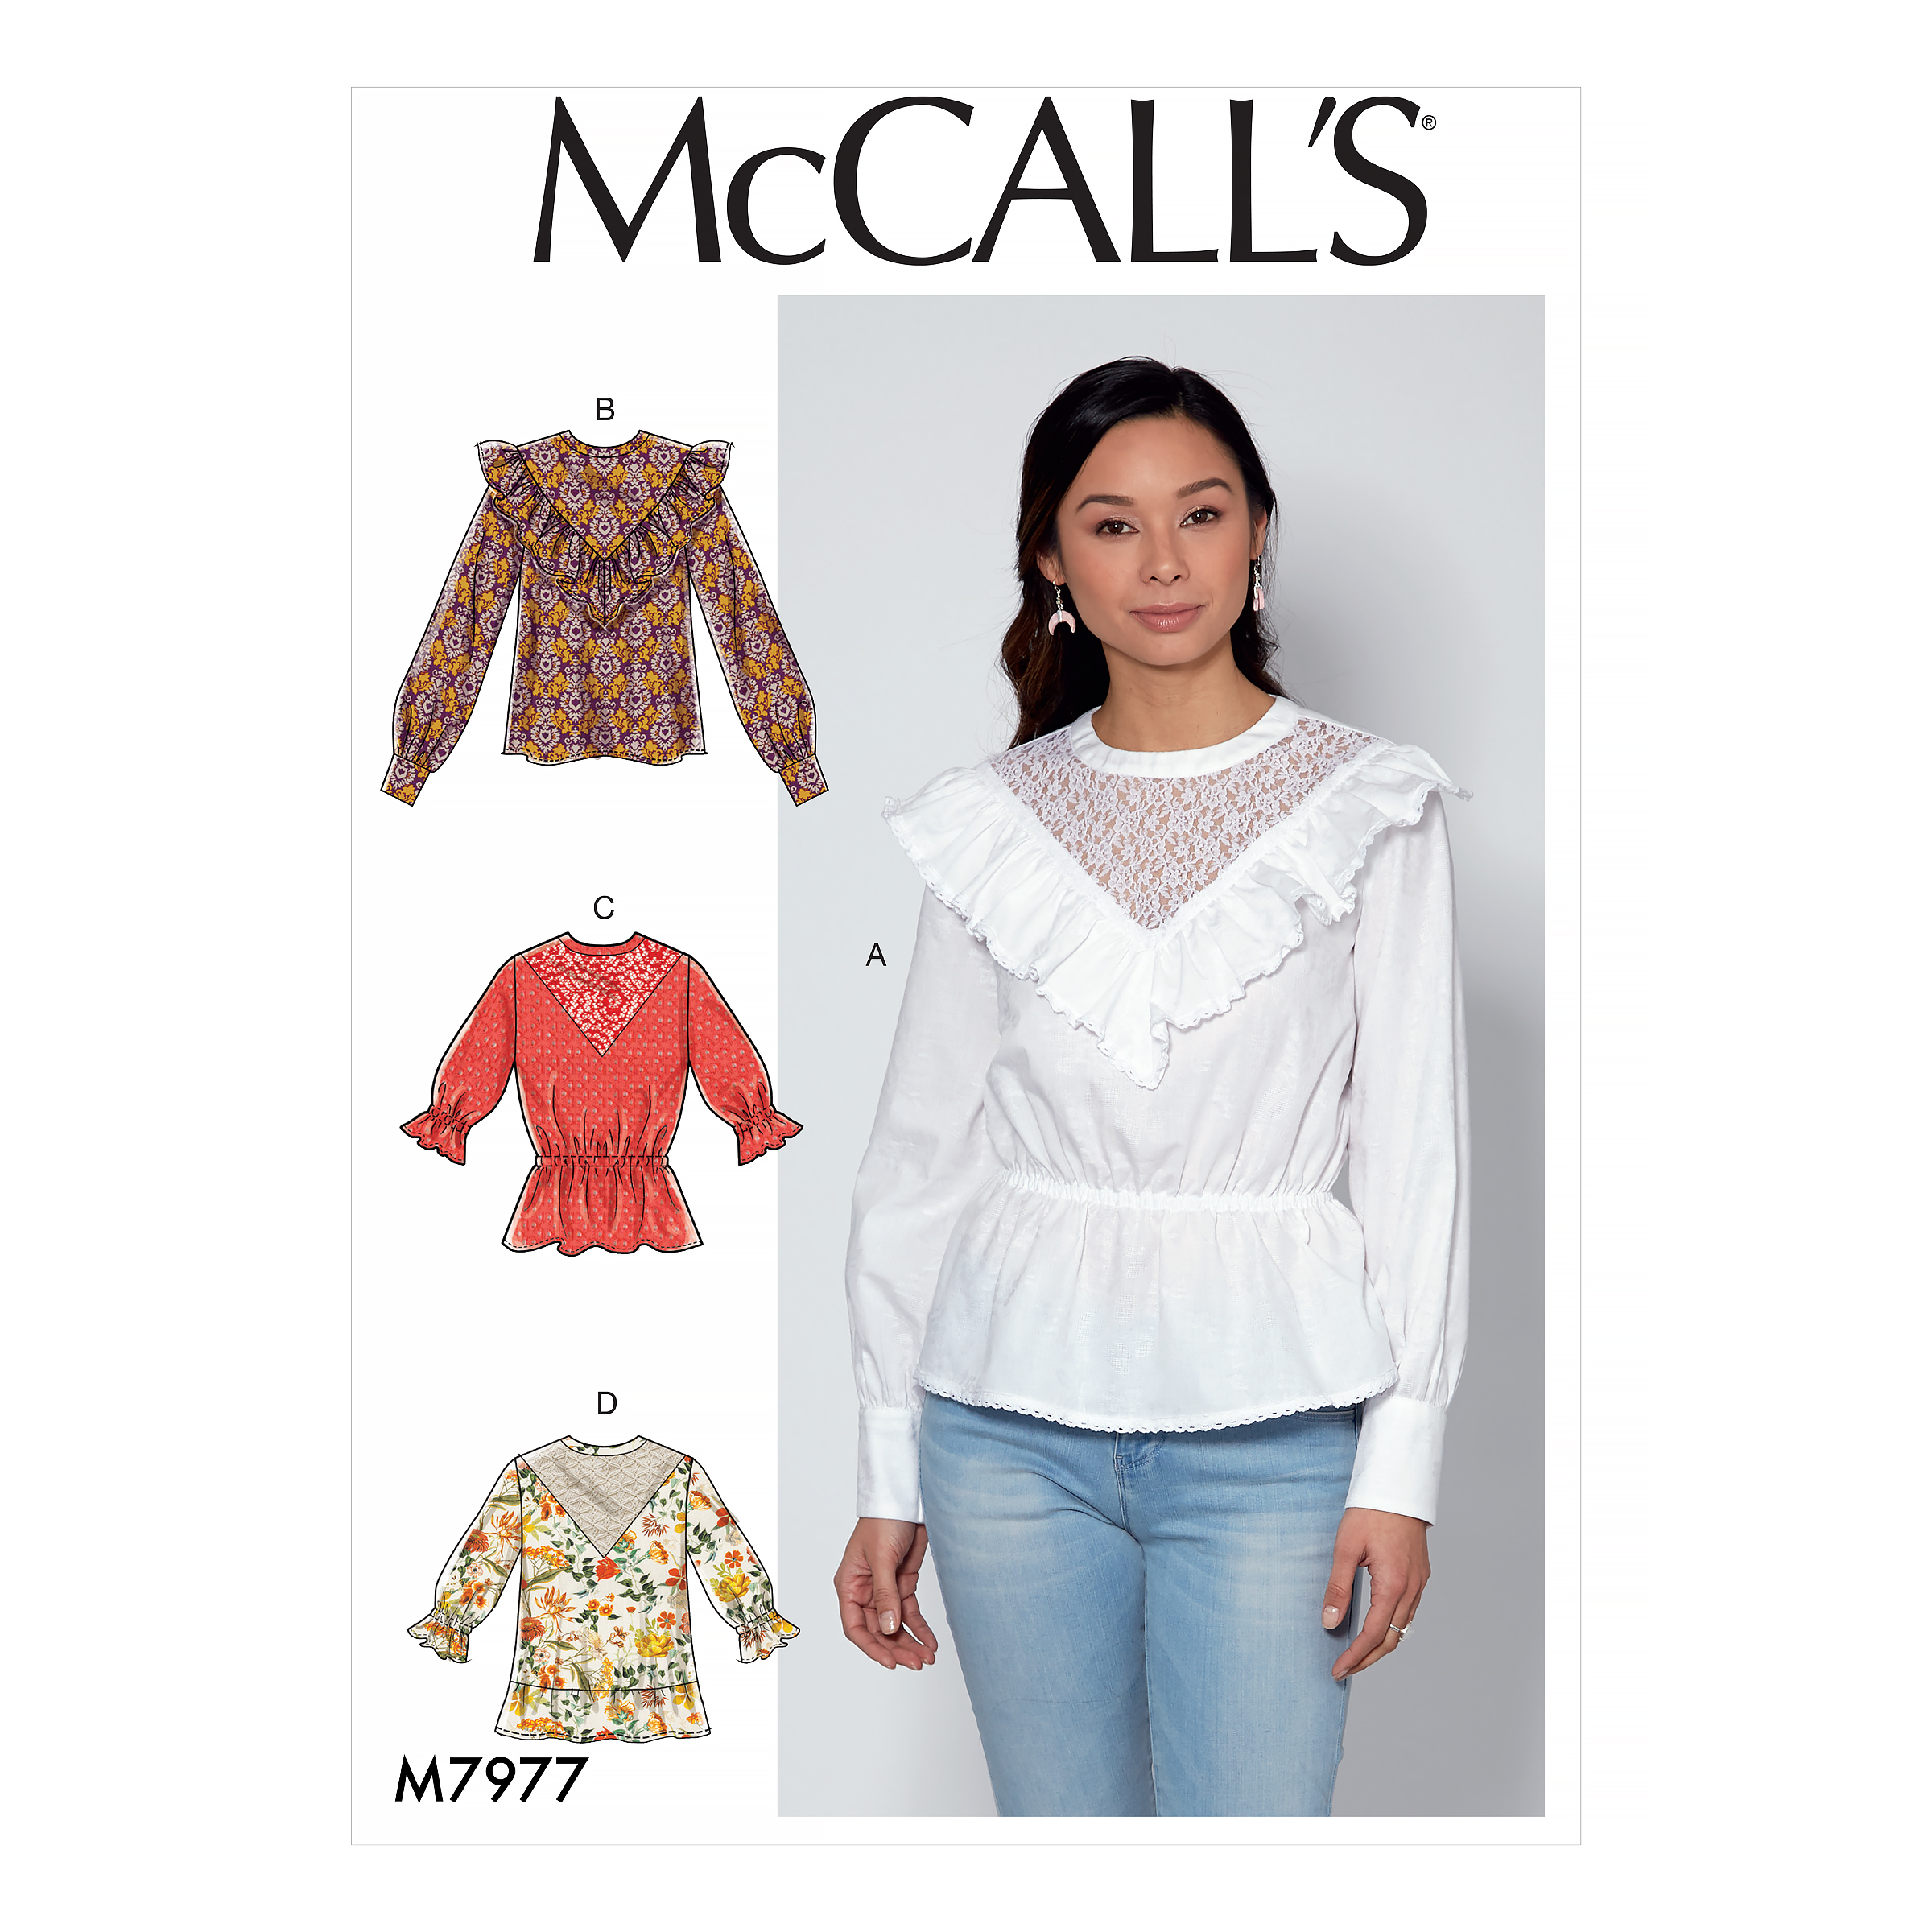 McCall's 7977 Misses' Tops